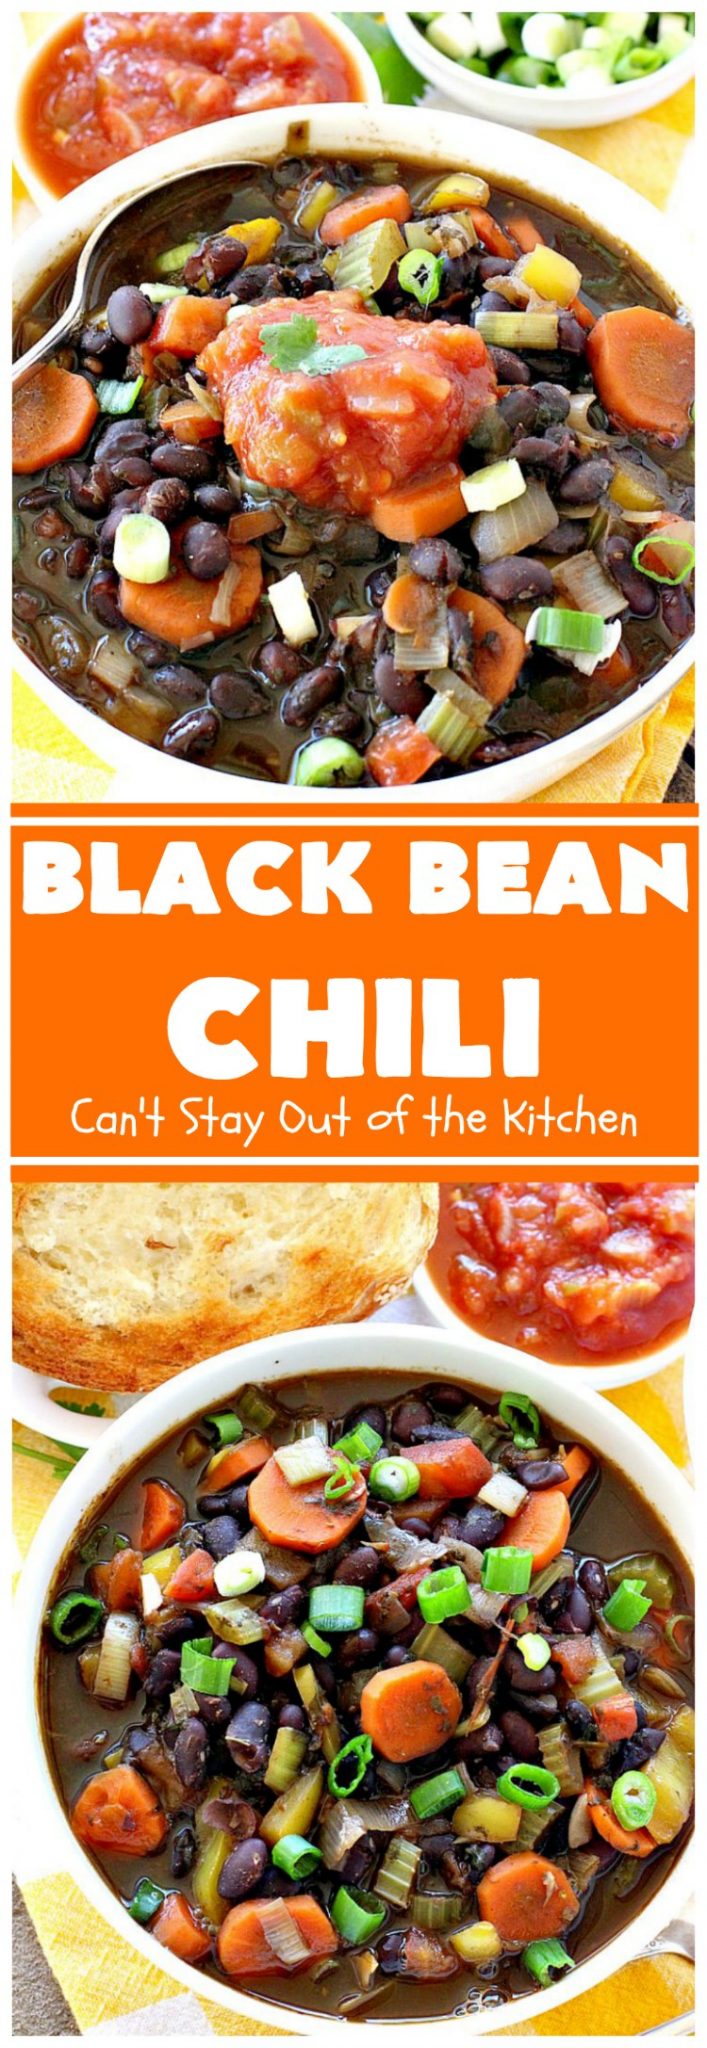 Black Bean Chili – Can't Stay Out of the Kitchen